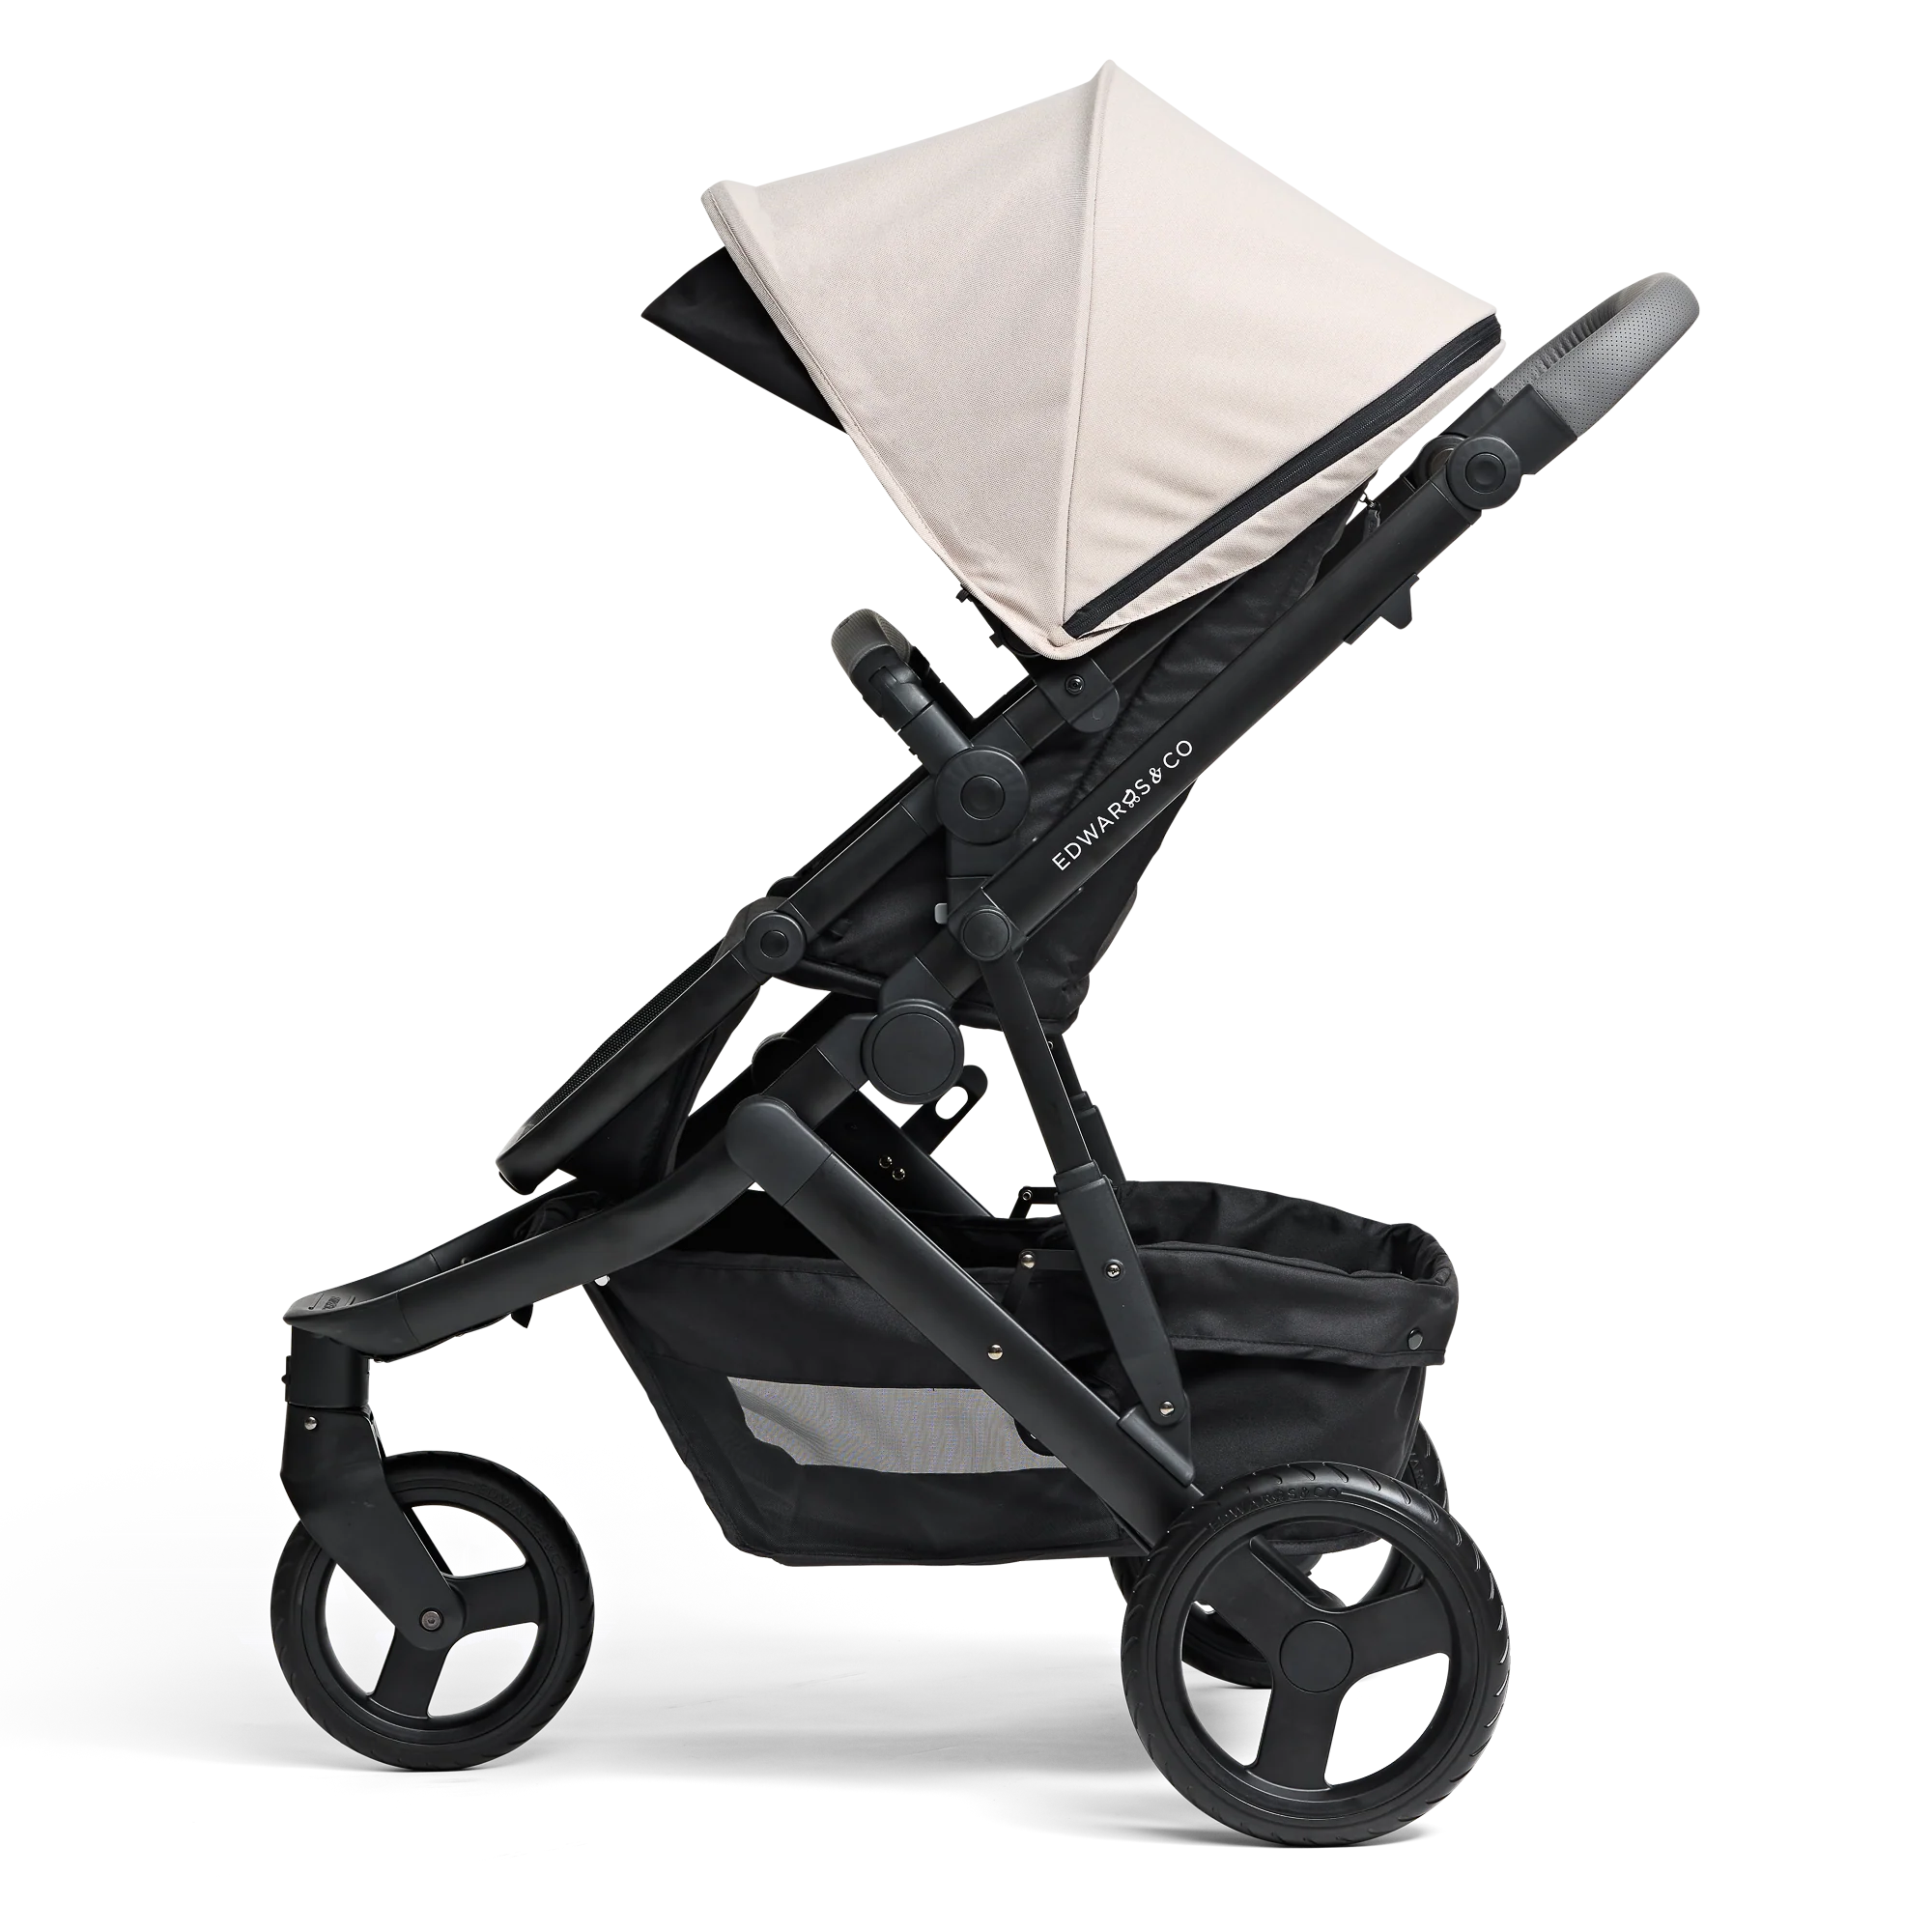 Edwards & Co Oscar M2 Stroller ( Ends 15 May) - Tiny Tots Baby Store 